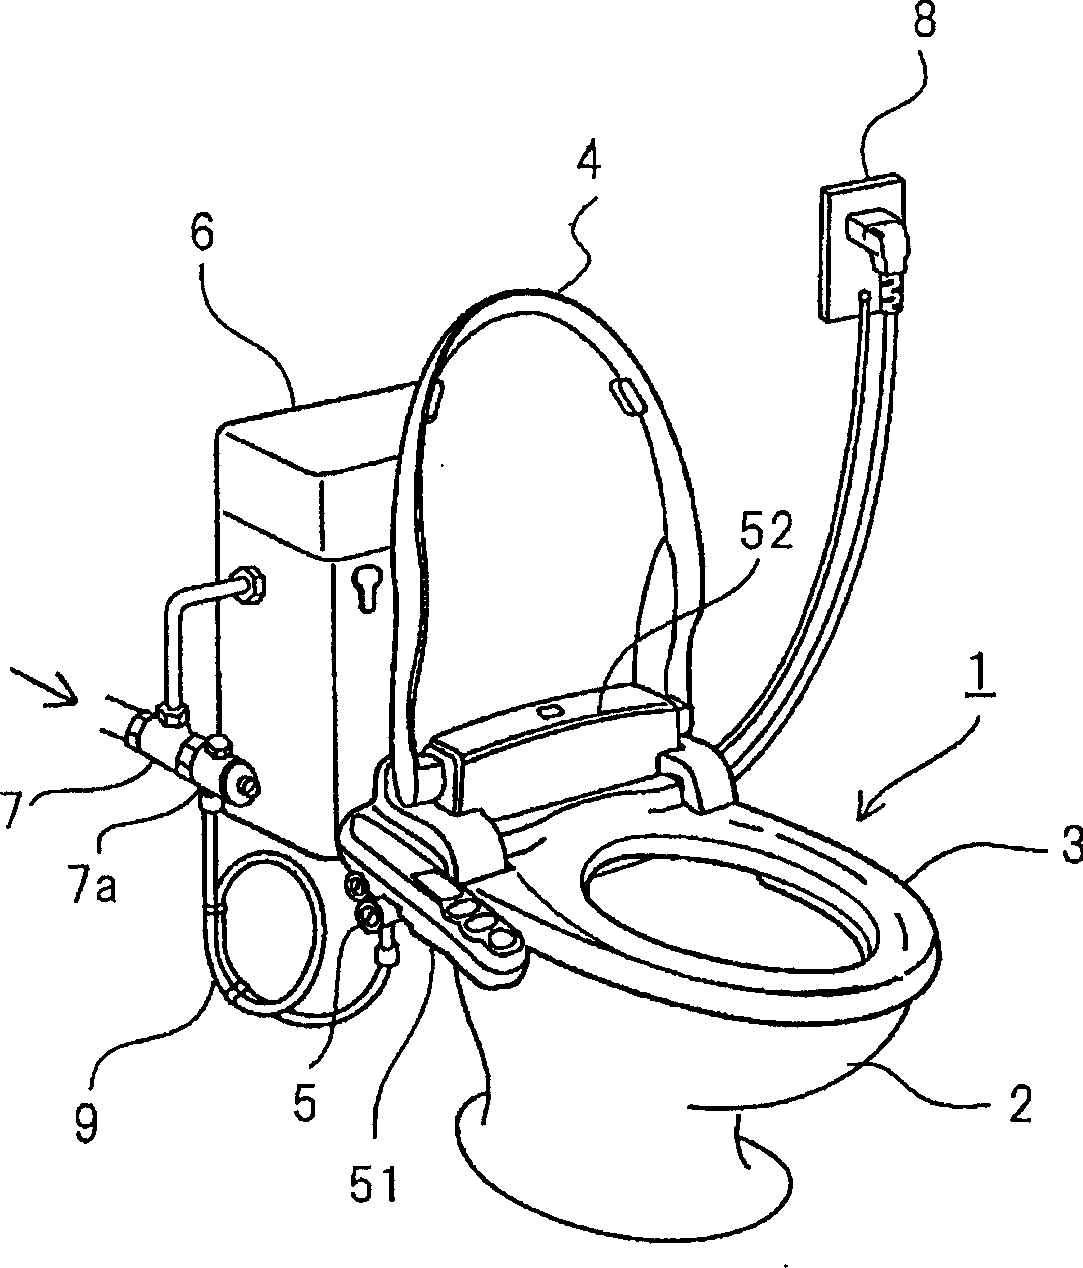 Cleaning device for toilet